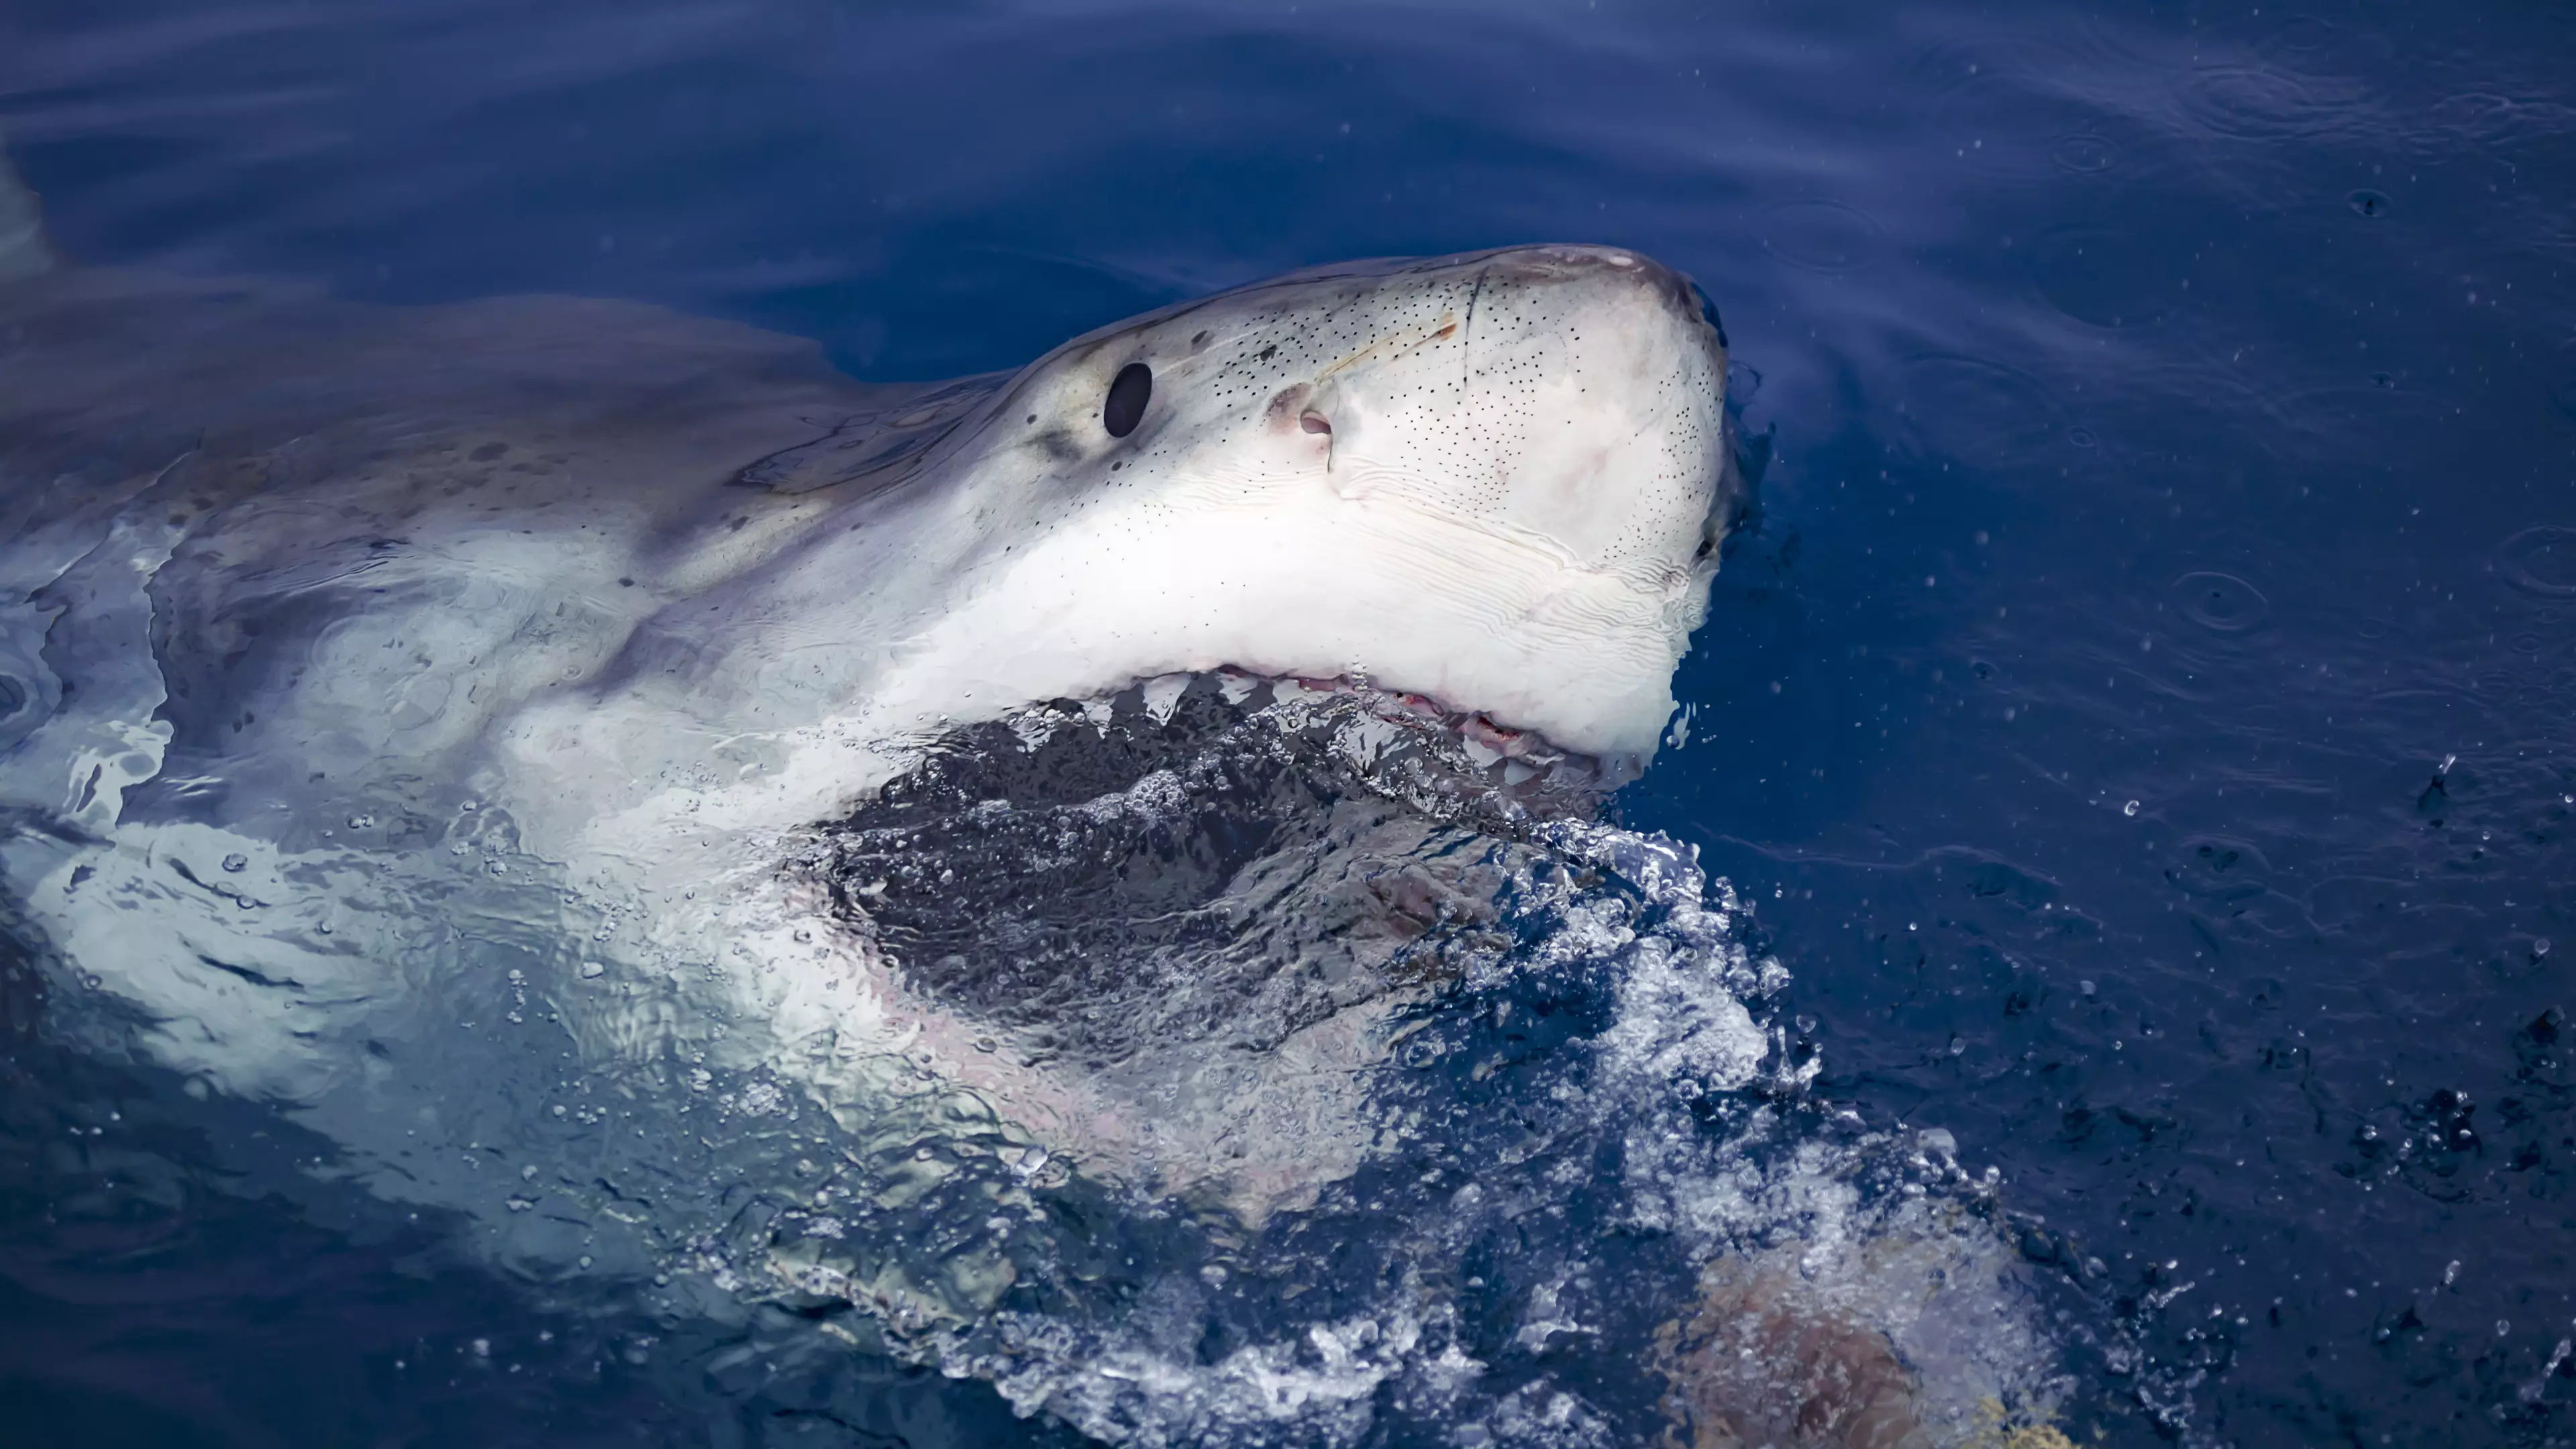 Surfer Fights Off Shark By Punching It In The Eye And Telling It To 'F*** Off'